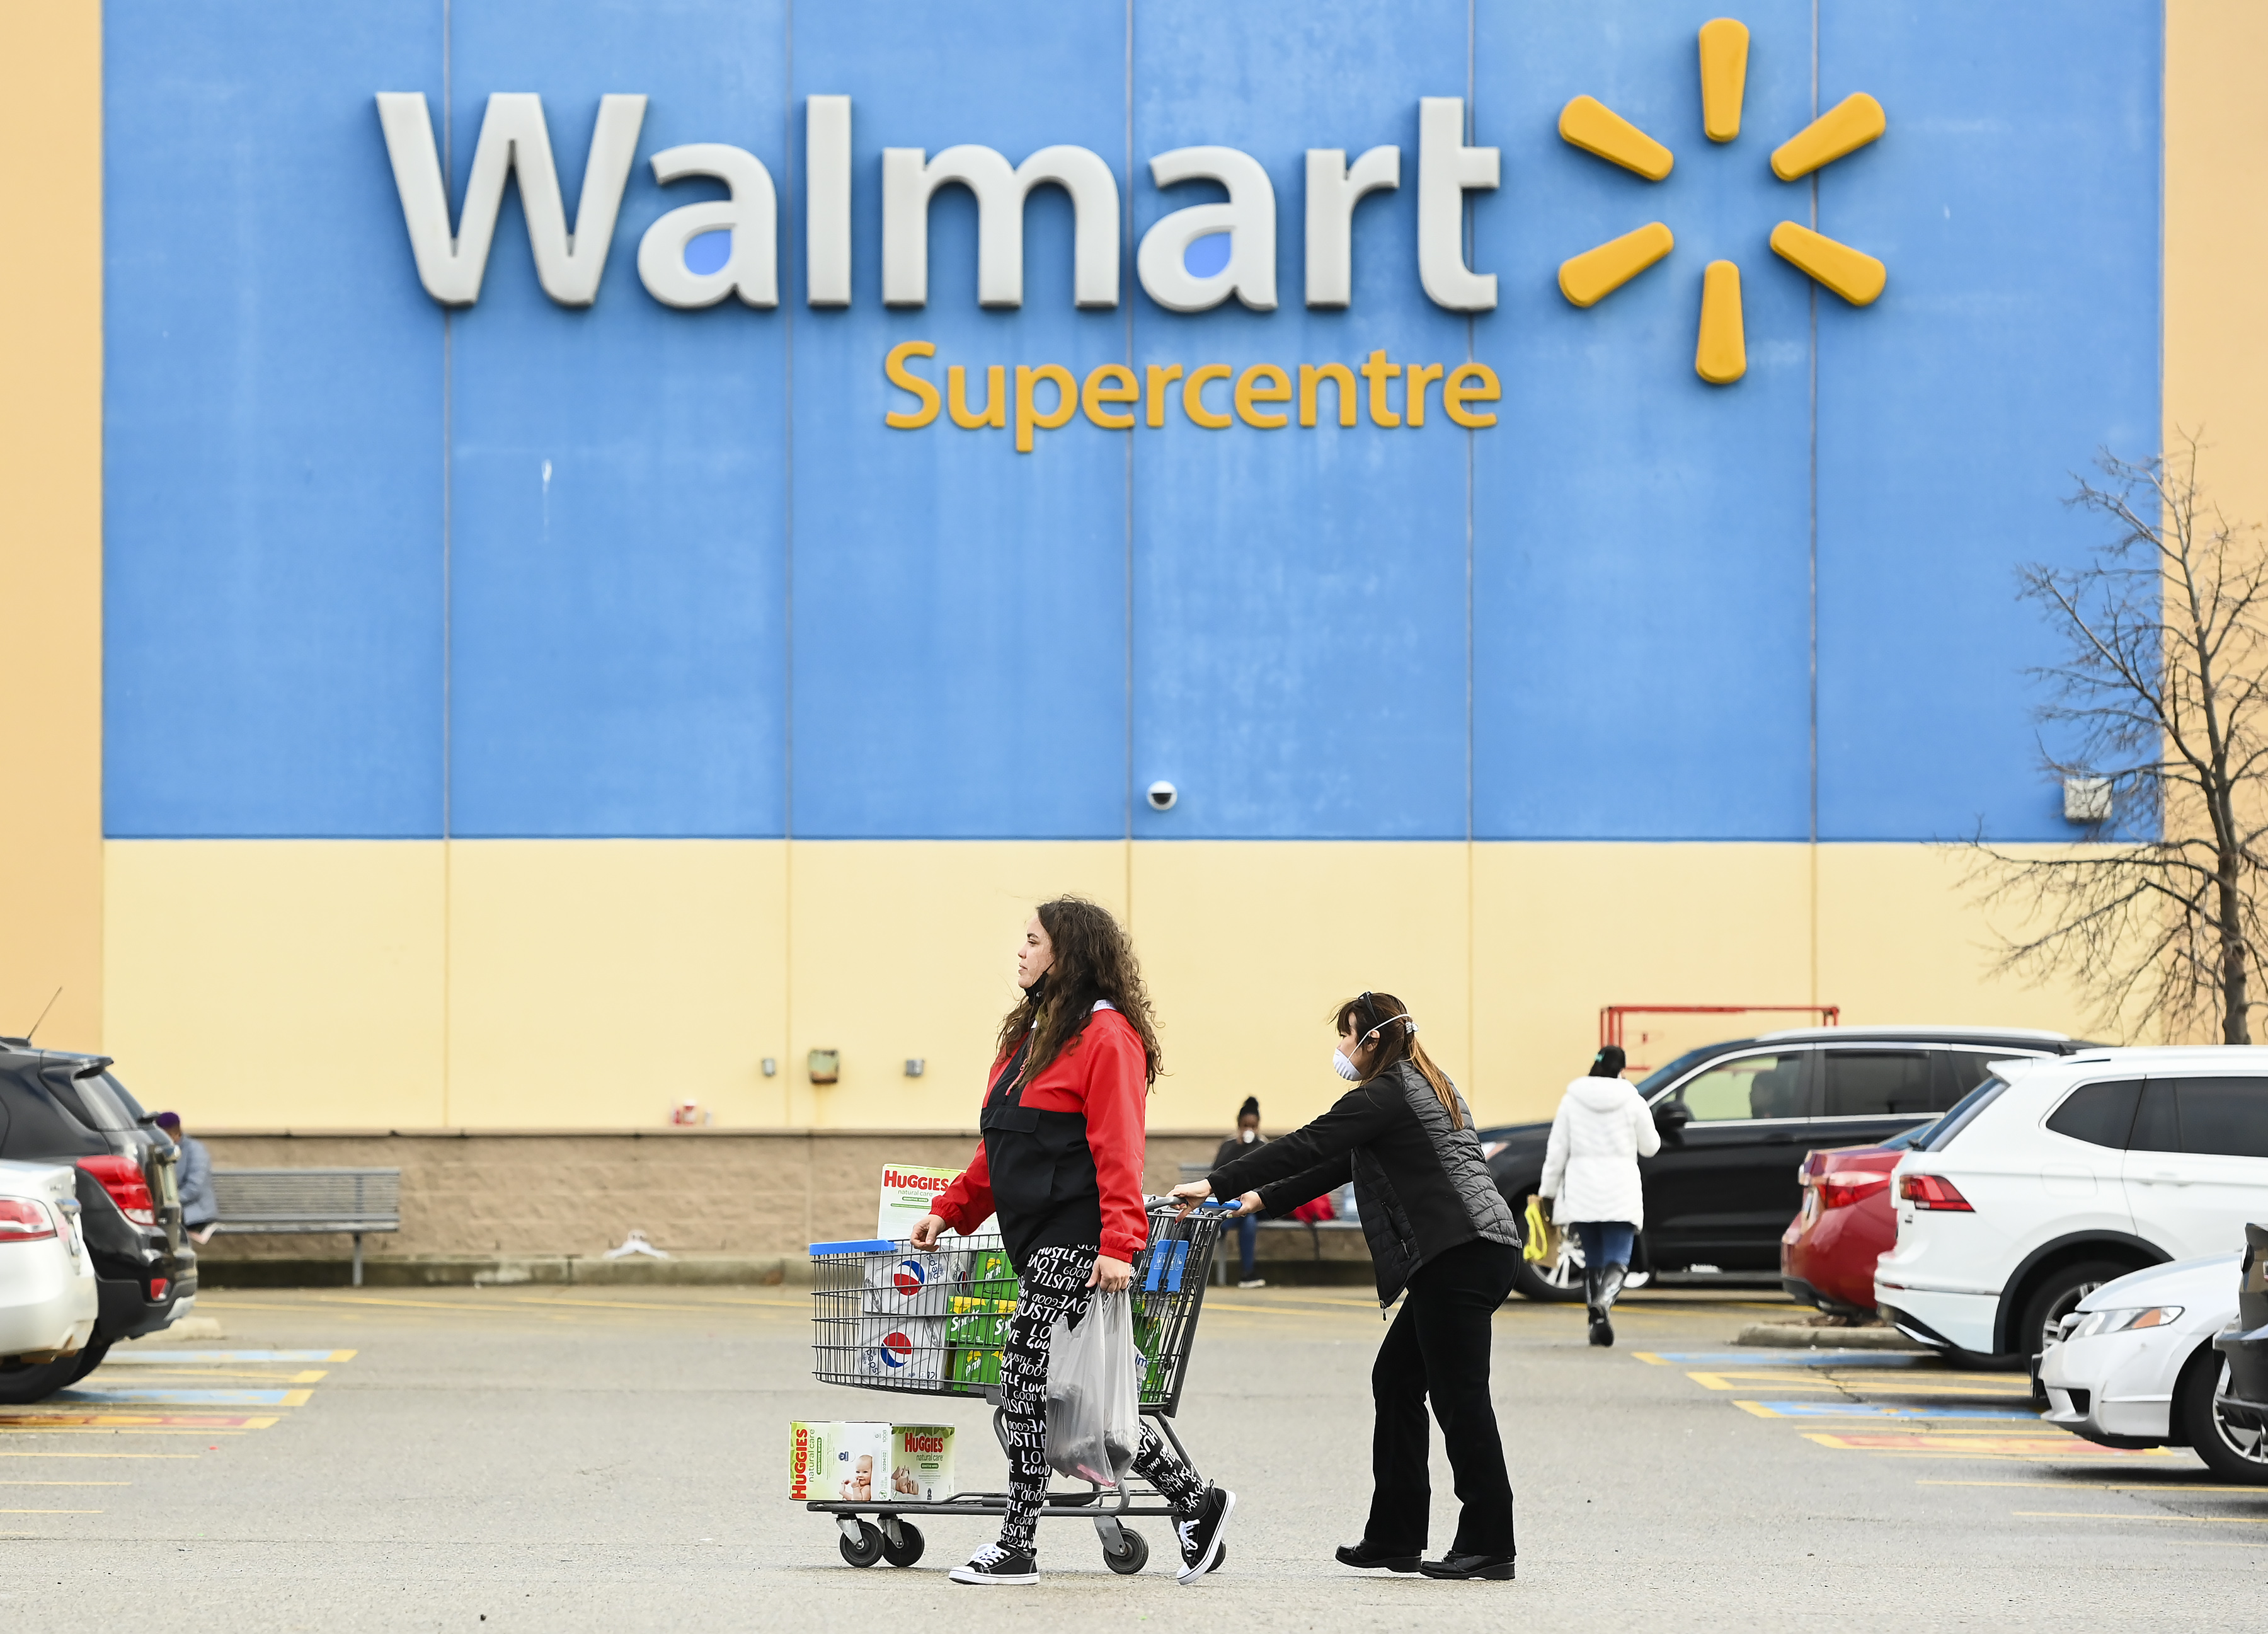 Walmart Canada says it will spend $1B to 'modernize' its stores